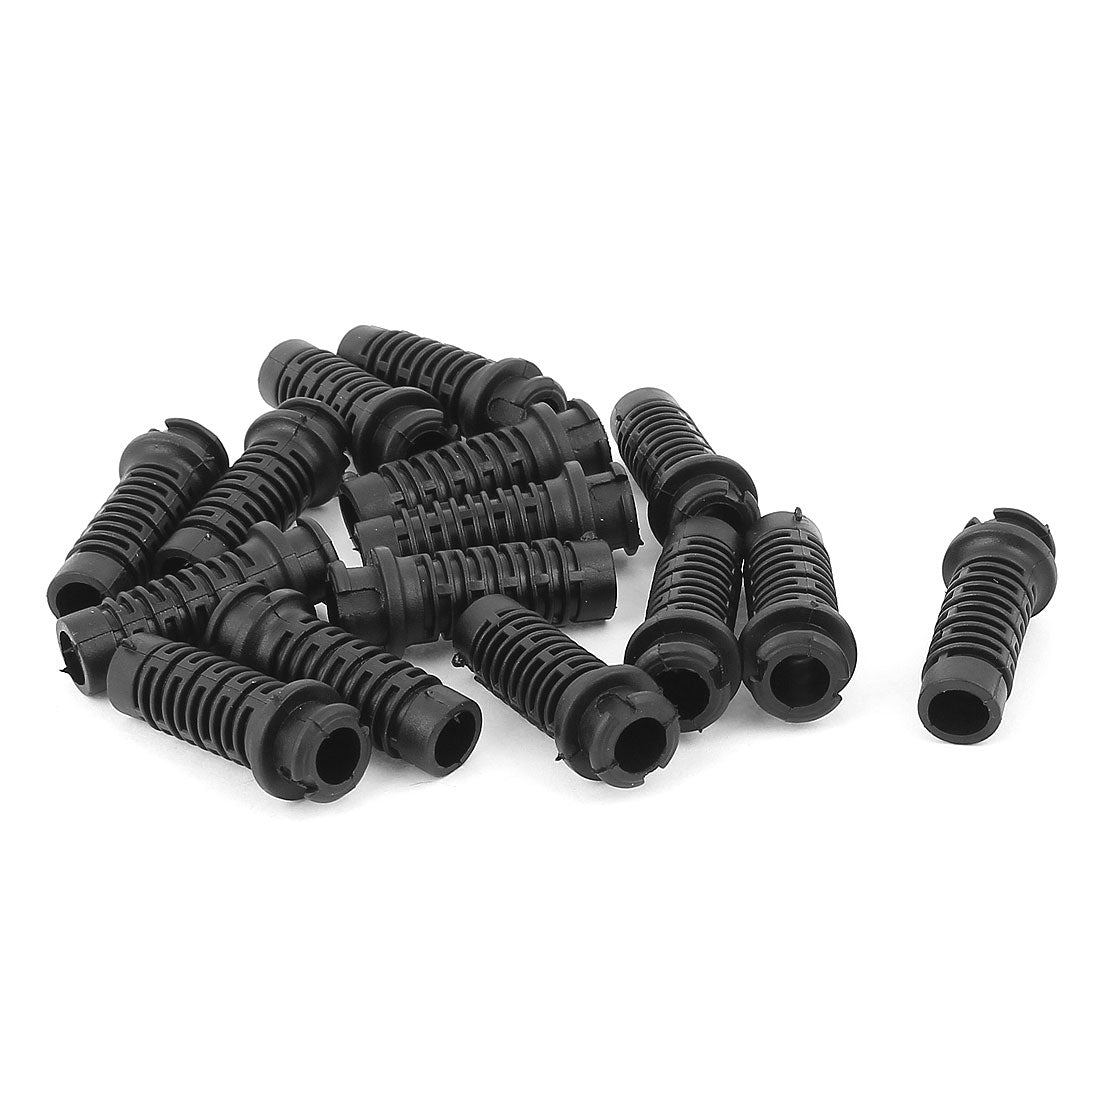 uxcell Uxcell 15pcs 38mmx12mmx8mm Rubber Strain Re-lief Cord Boot Protector Cable Sleeve Hose for Cellphone Charger